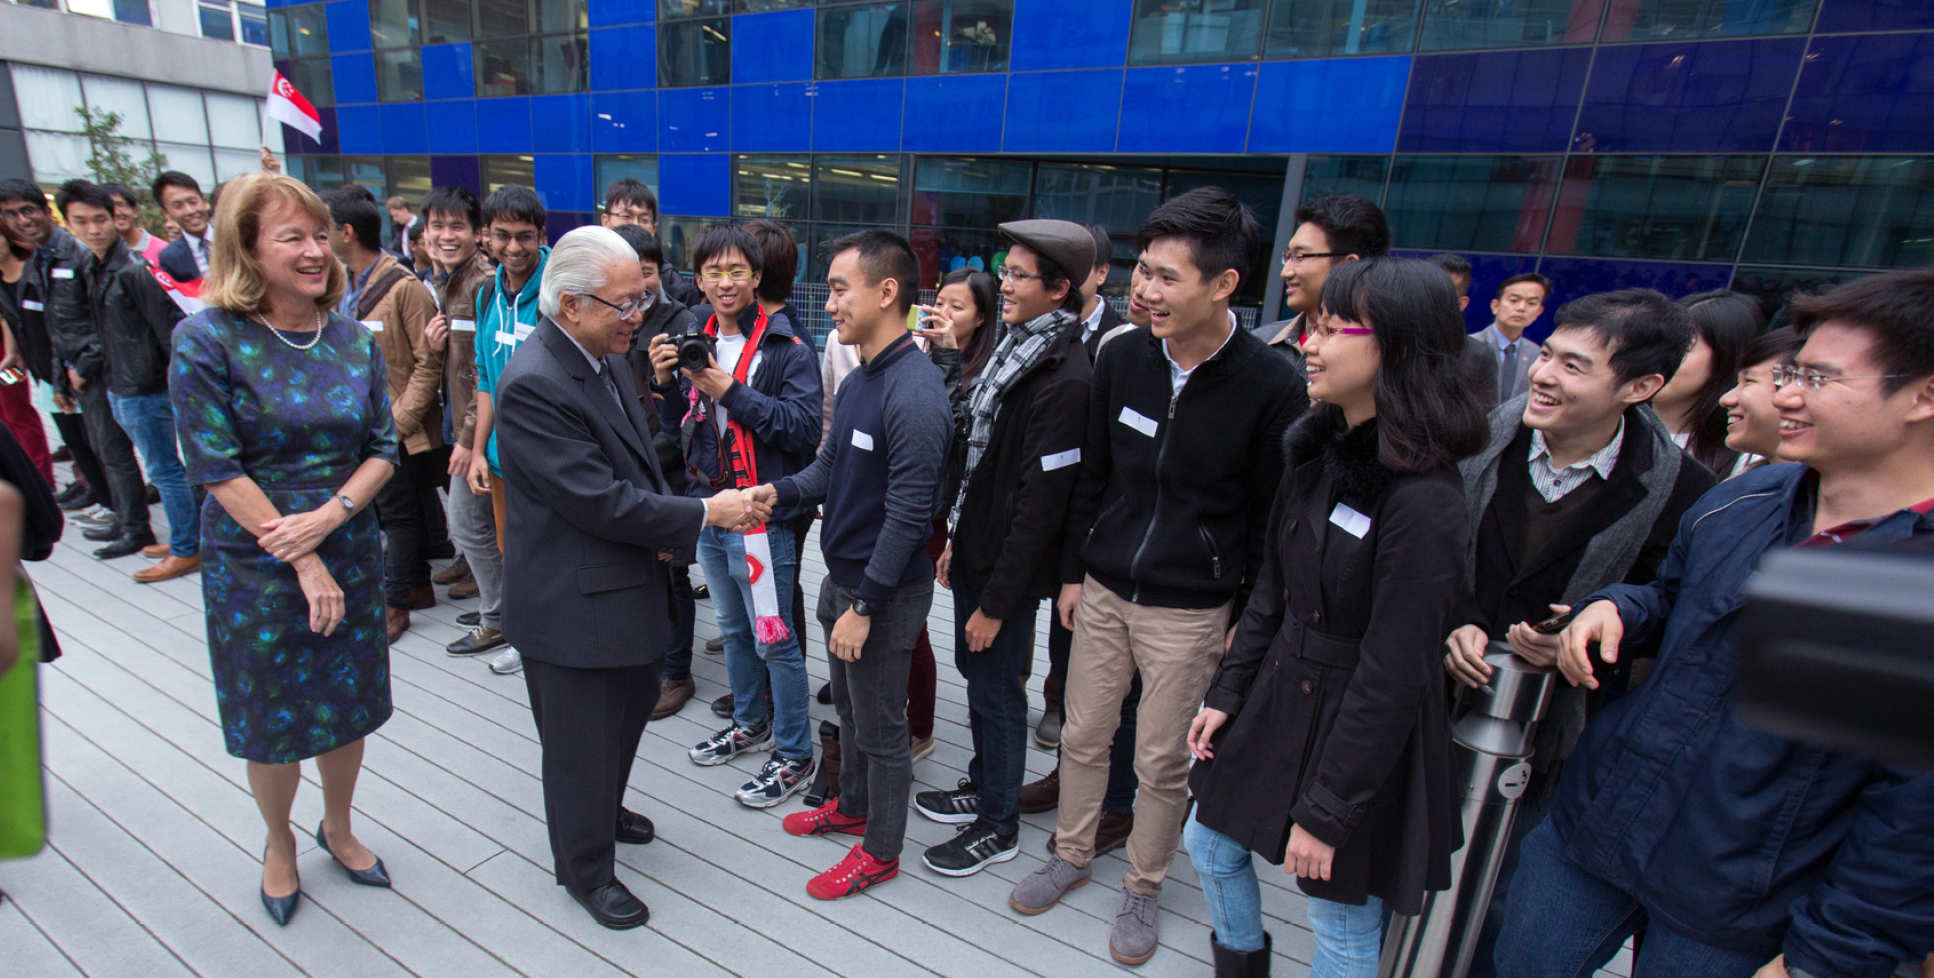 Dr Tony Tan at Imperial in 2014